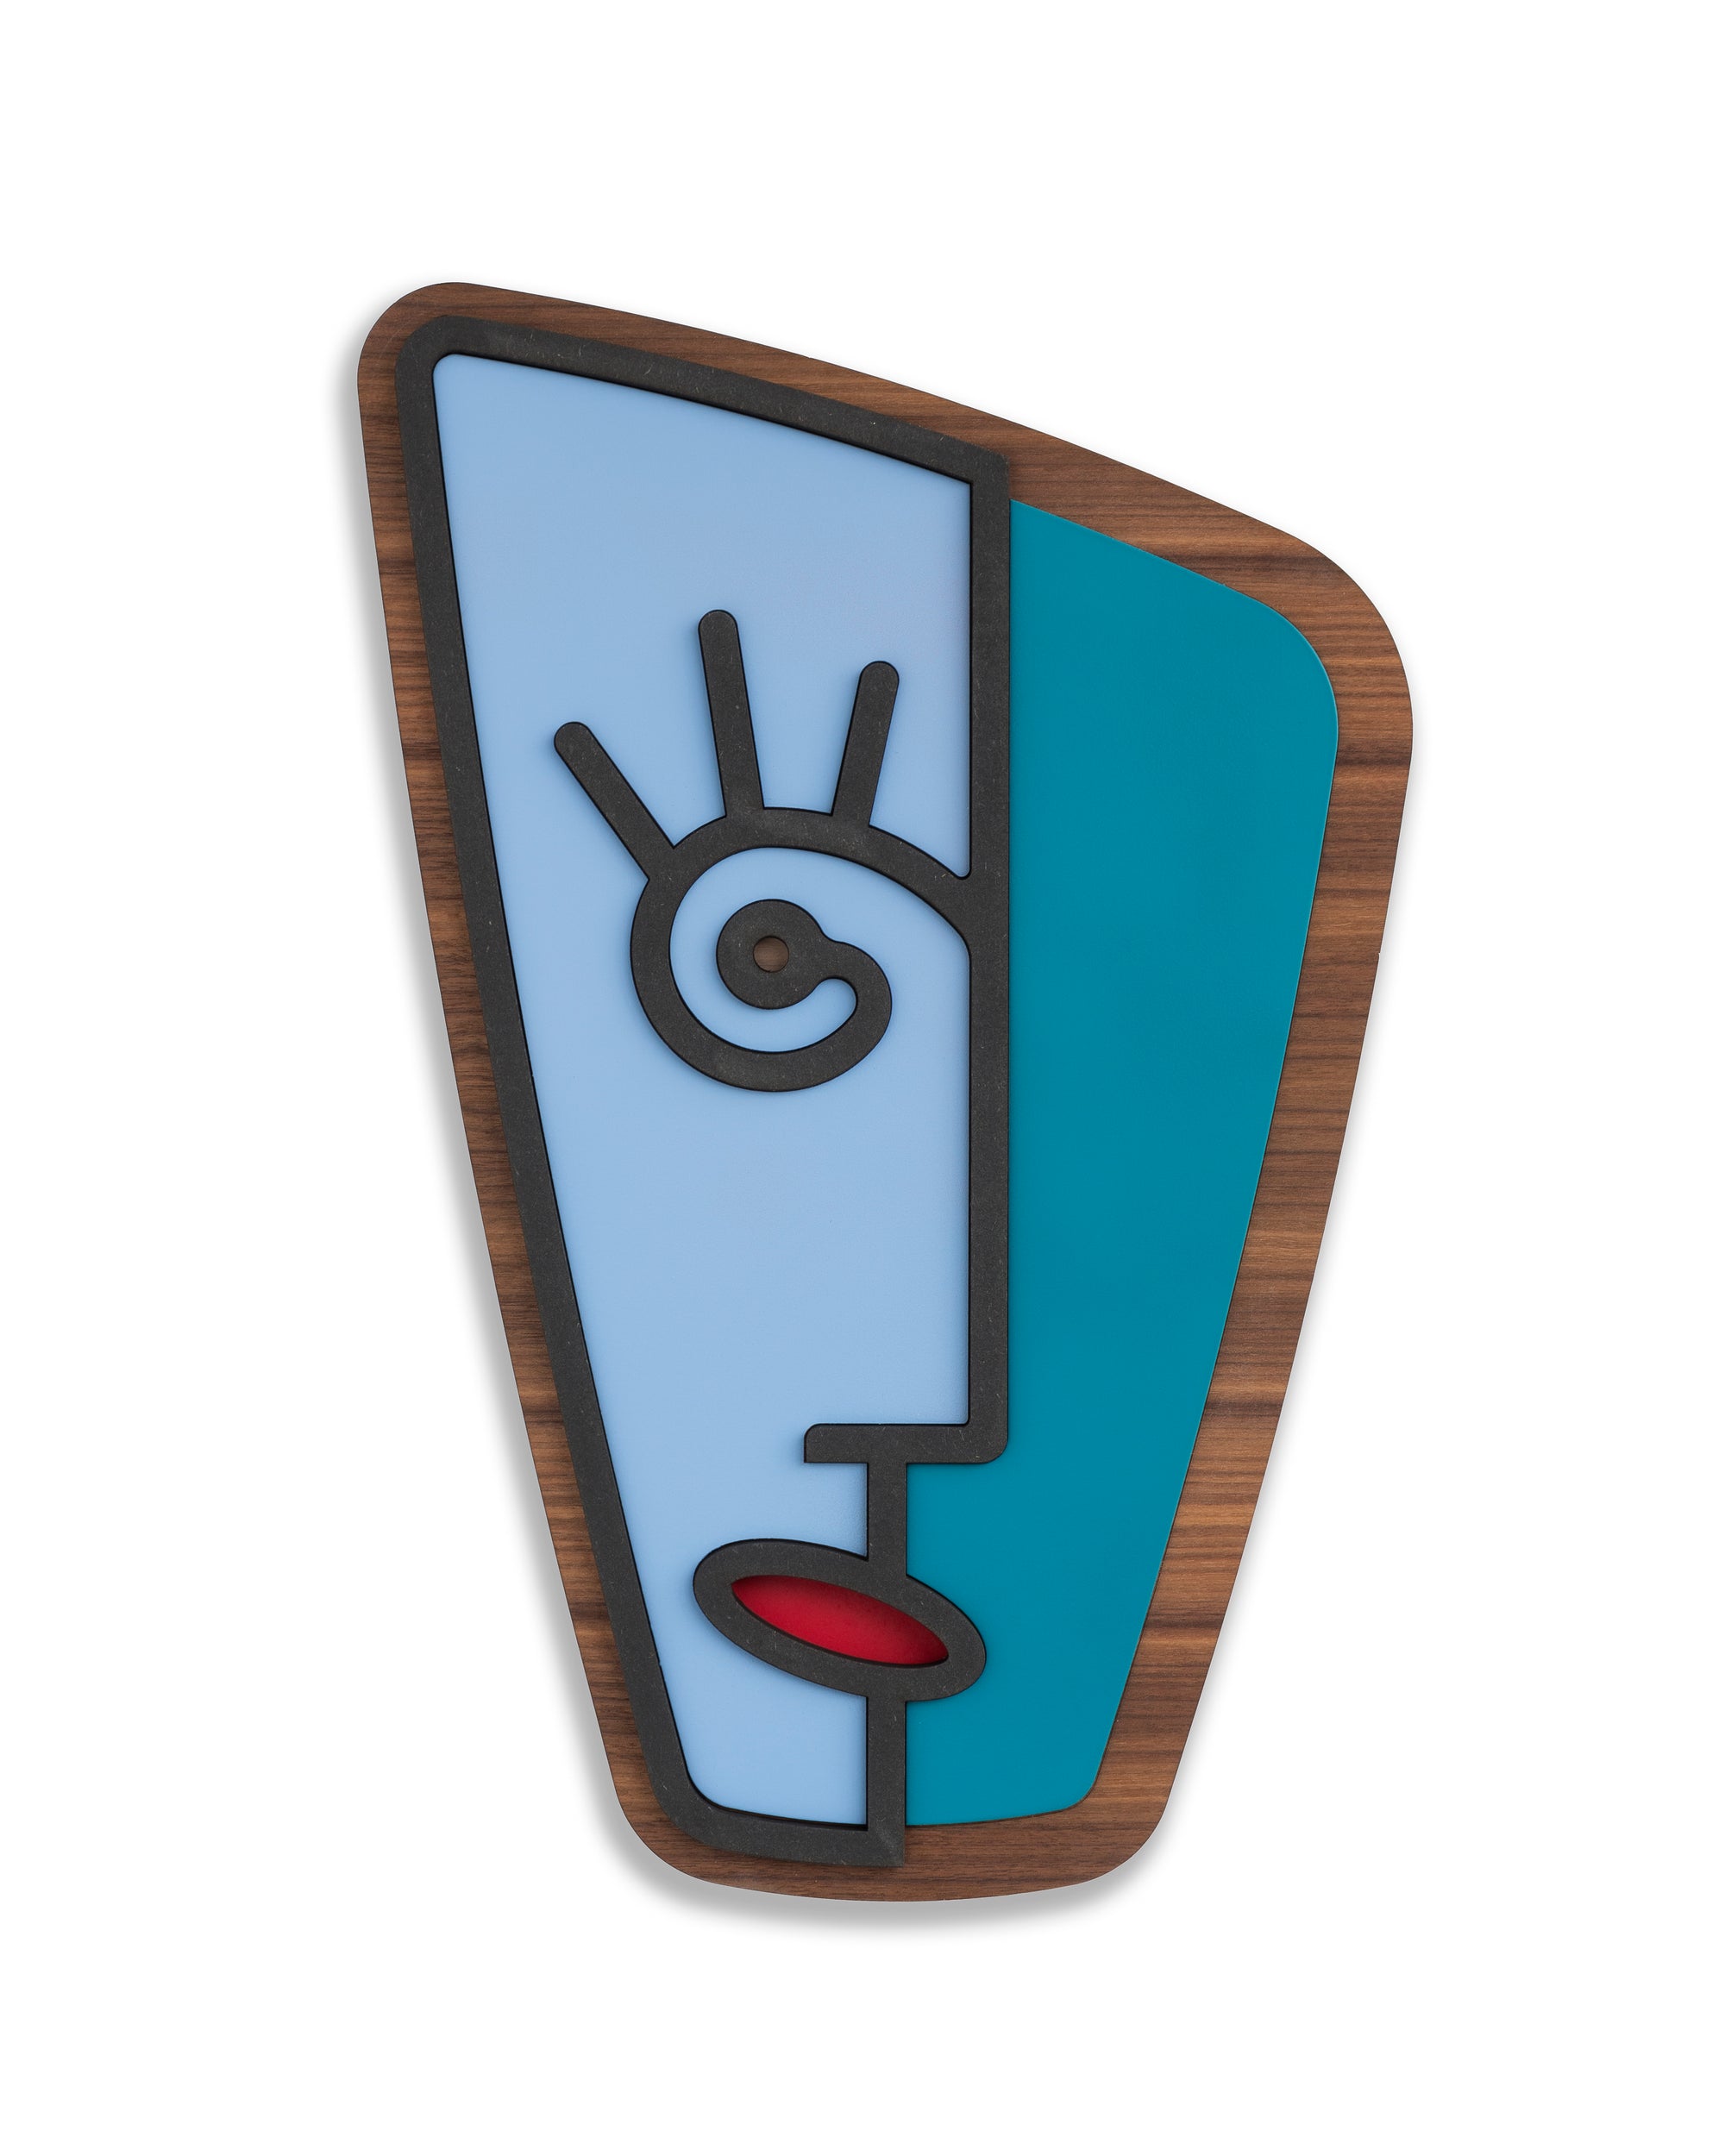 Reflect your face & personality with Picasso line drawings in wall decor - Blue Colors